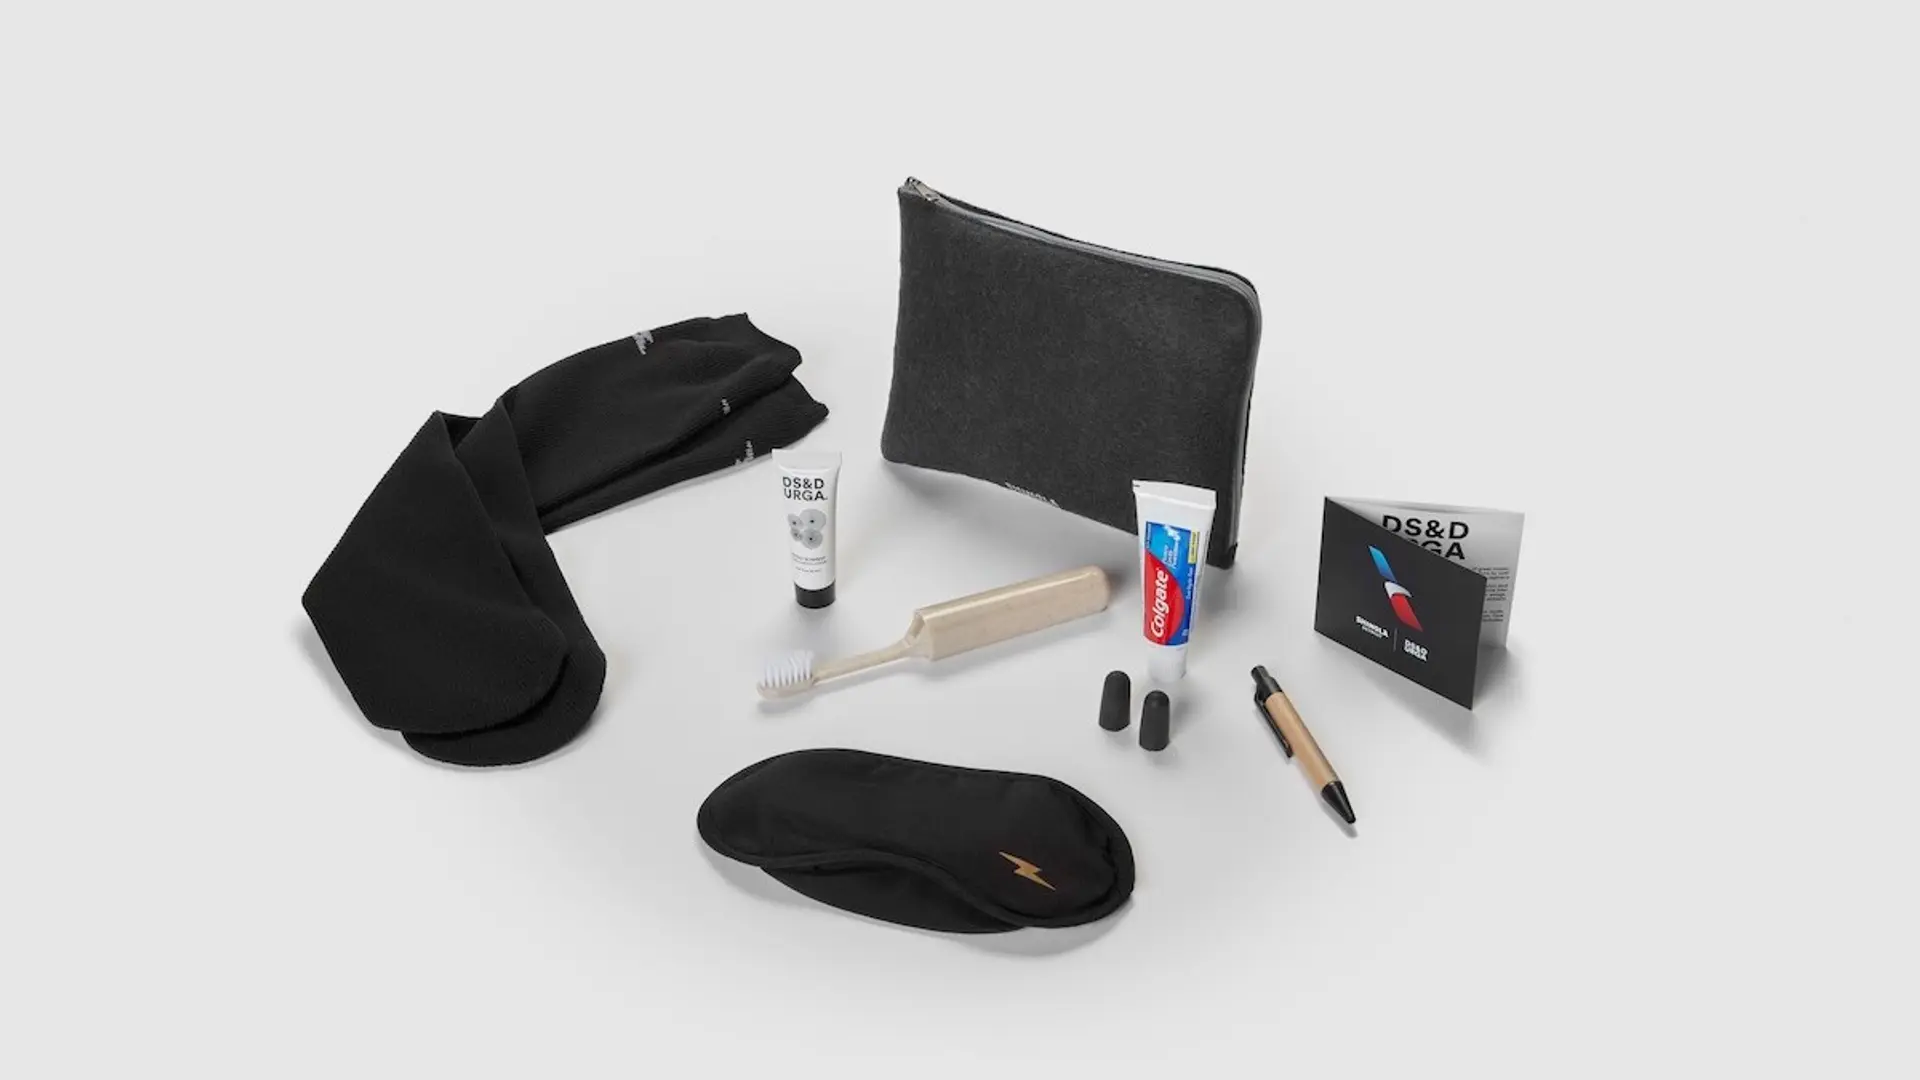 Airlines News - American Airlines introduces new premium amenity kits